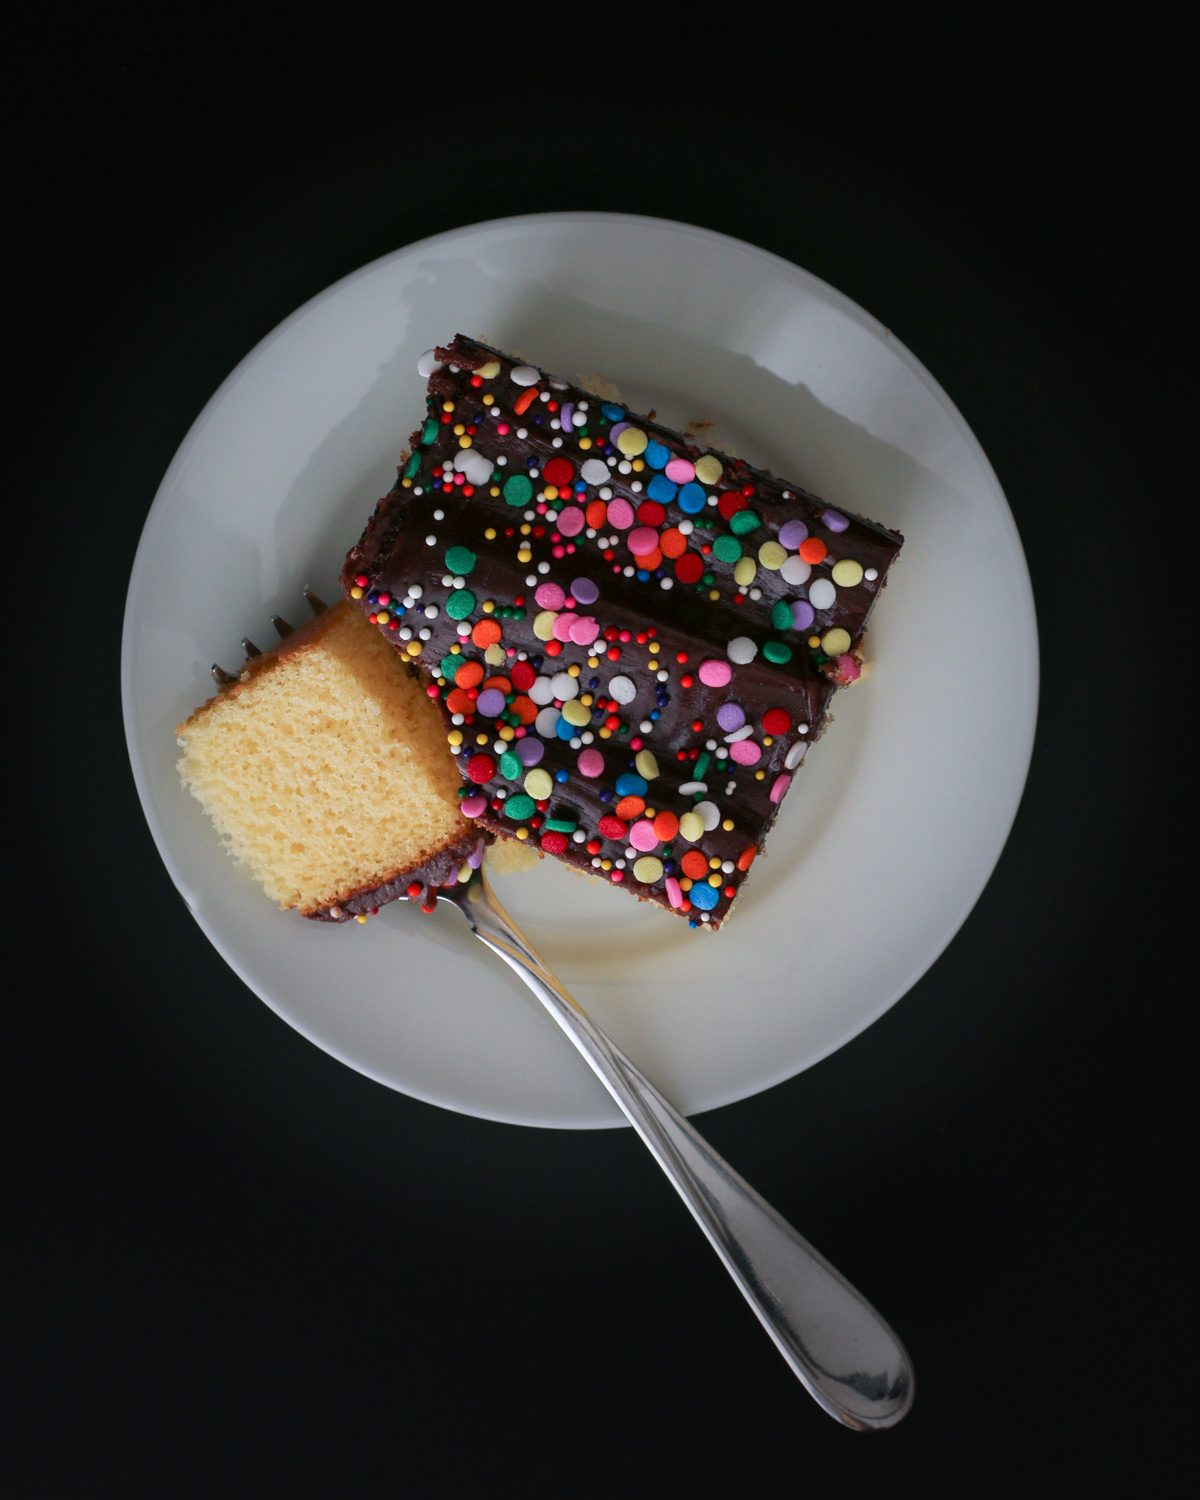 square of yellow cake on plate with chocolate frosting and sprinkles.